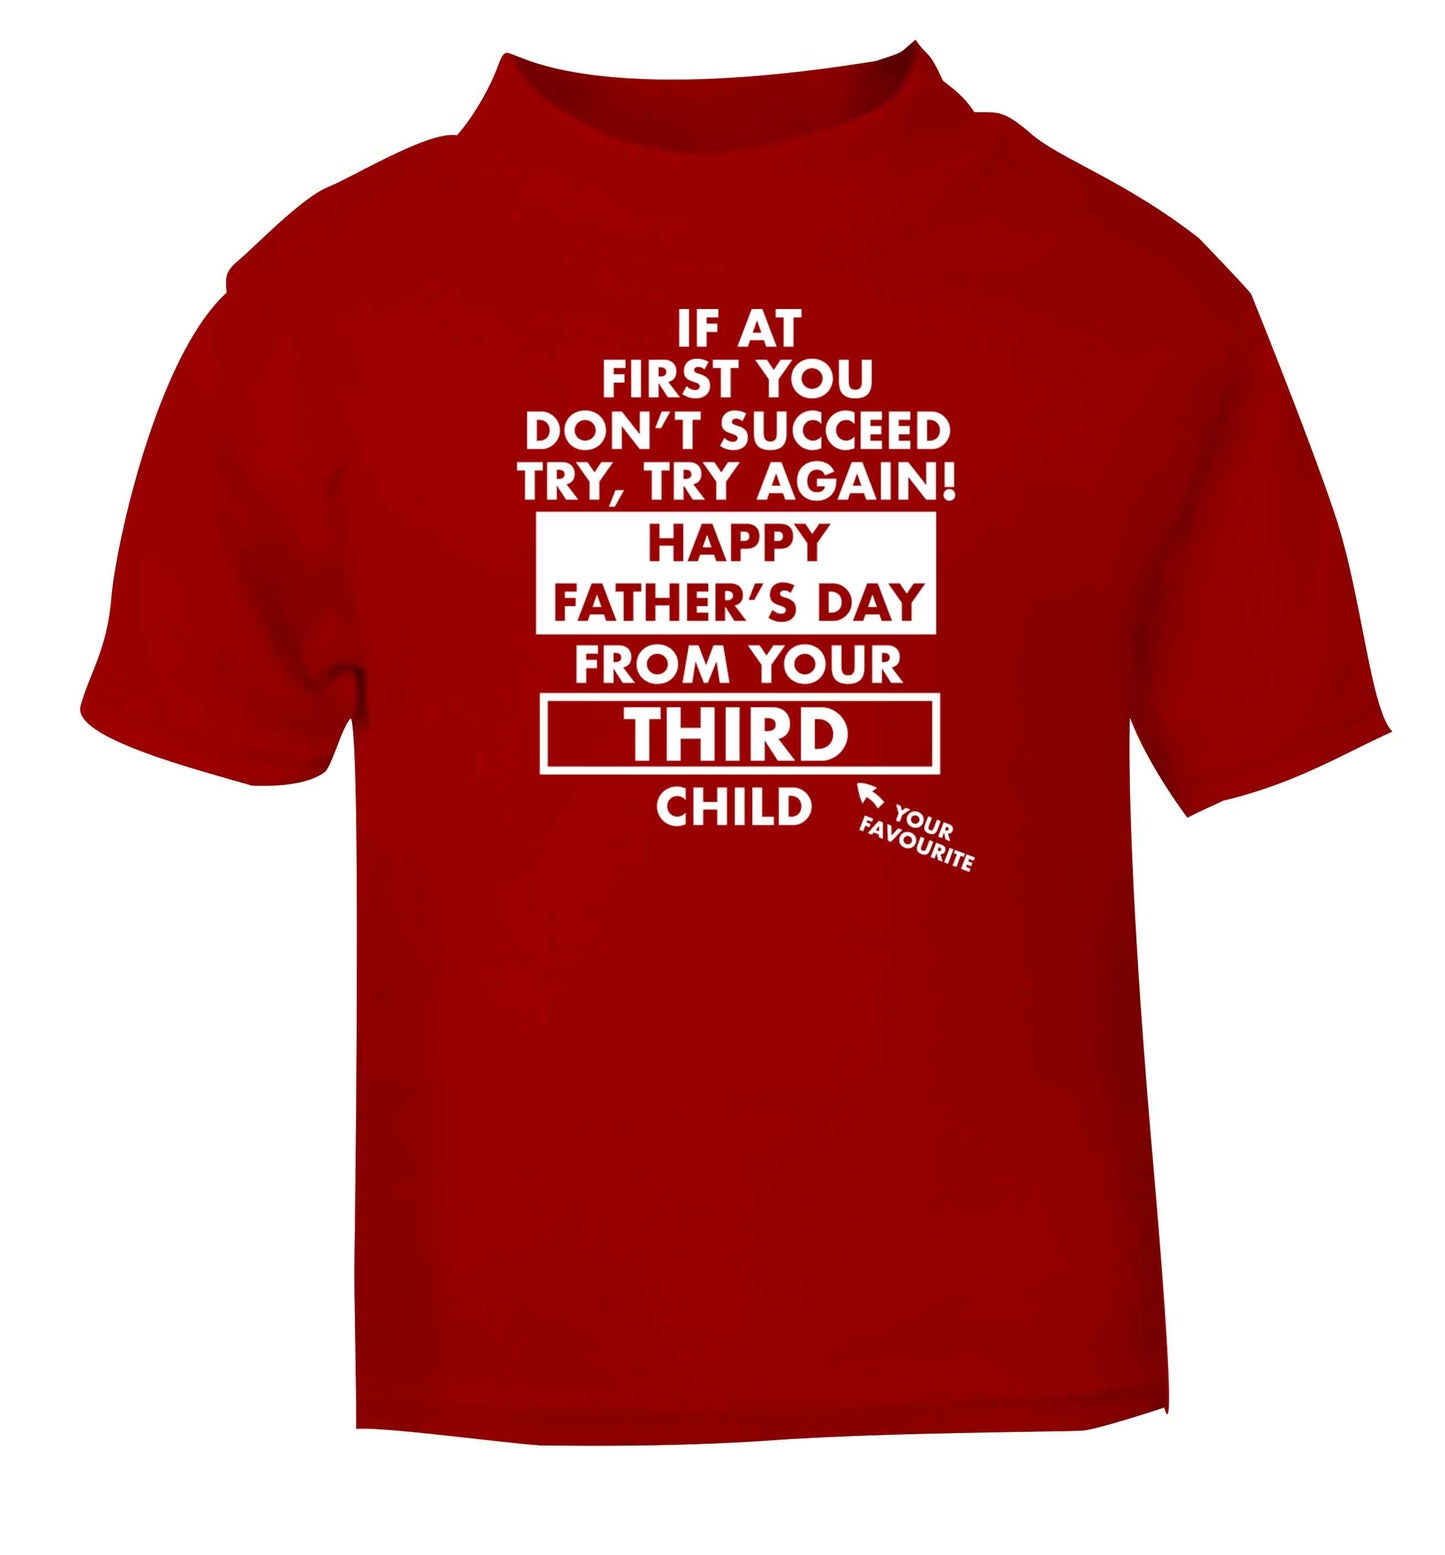 If at first you don't succeed try, try again Happy Father's day from your third child! red baby toddler Tshirt 2 Years